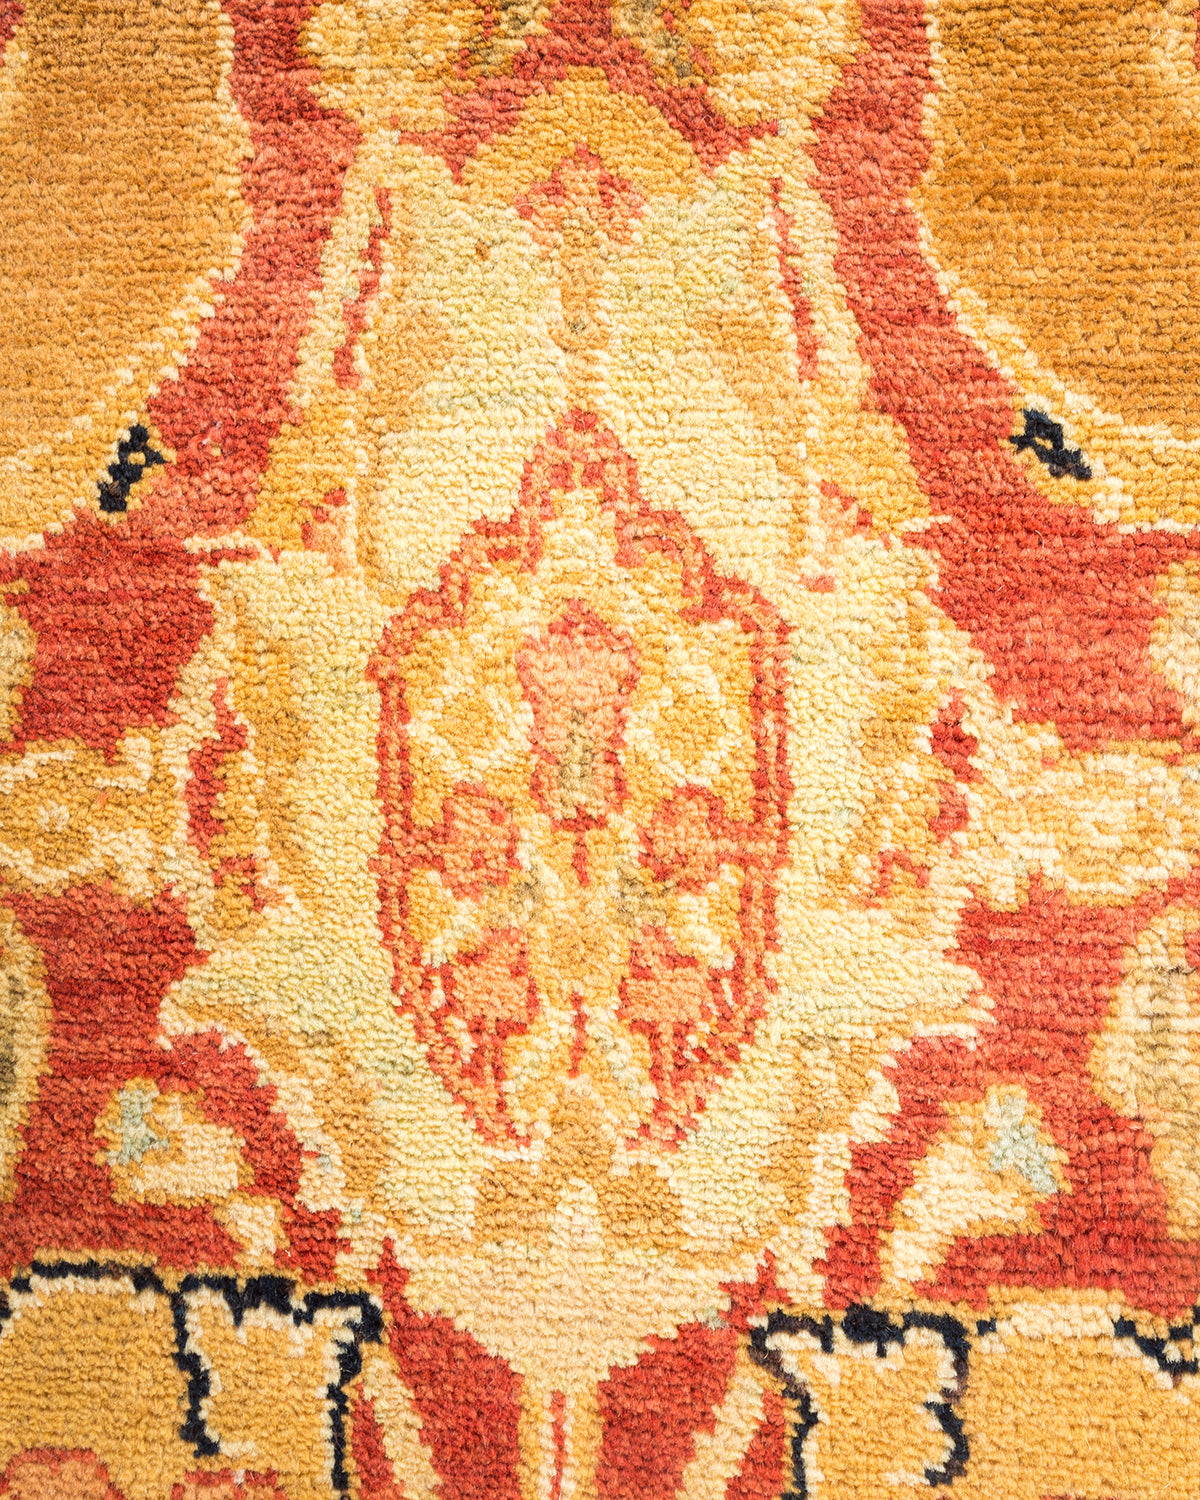 Eclectic, One-of-a-Kind Hand-Knotted Area Rug  - Orange, 6' 2" x 9' 3"